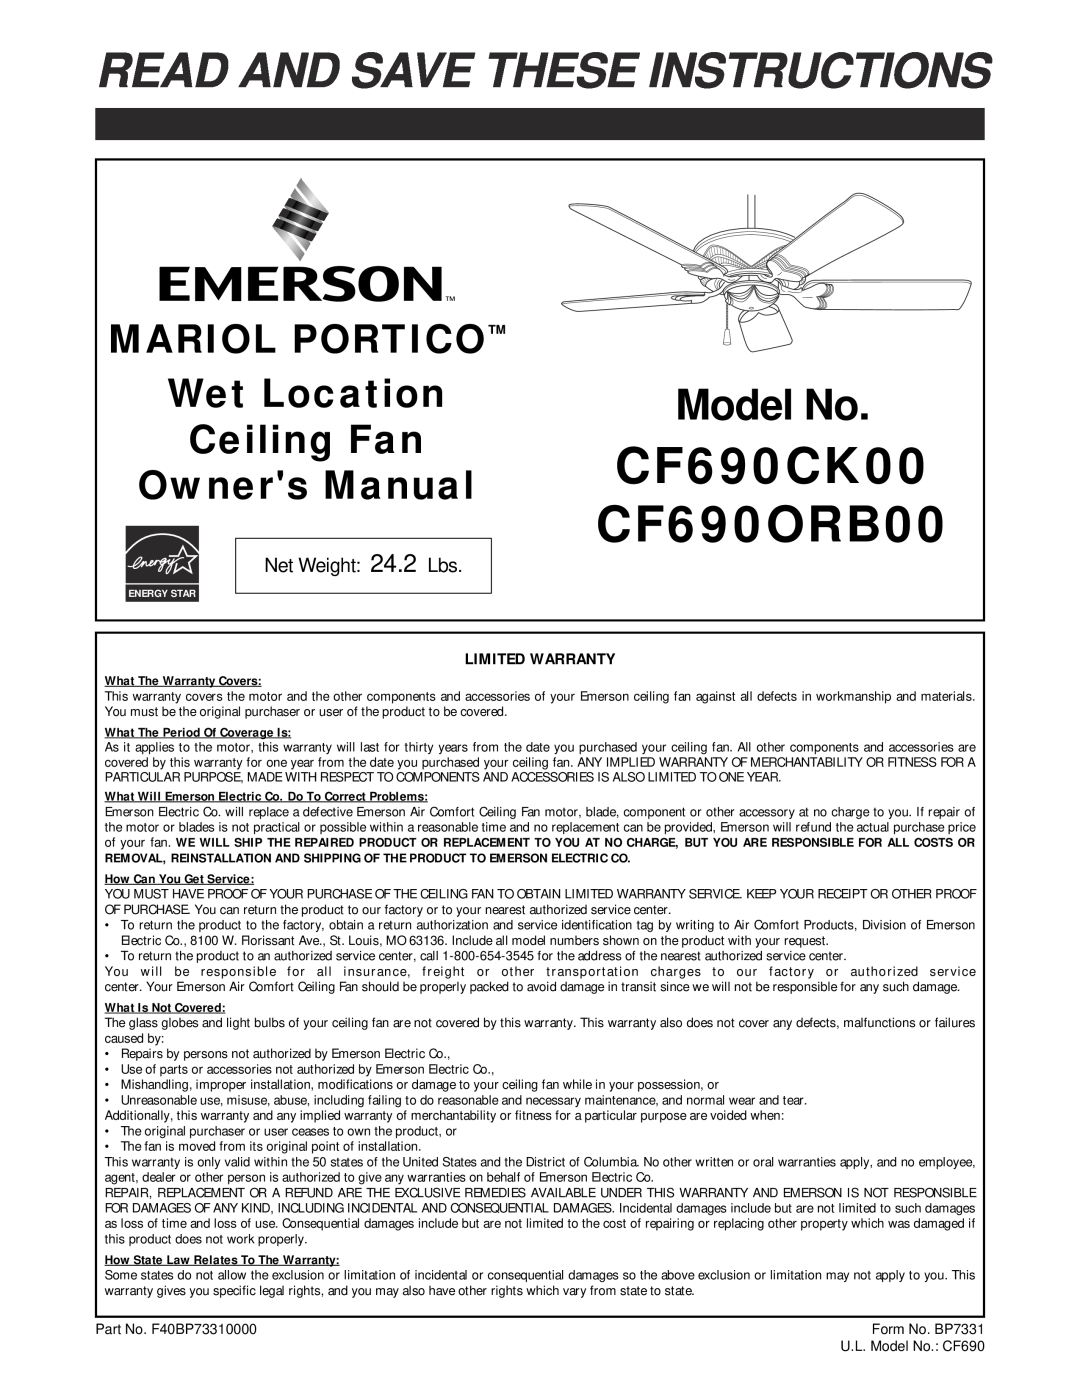 Emerson warranty CF690CK00 CF690ORB00, Read And Save These Instructions, Model No, What The Warranty Covers 